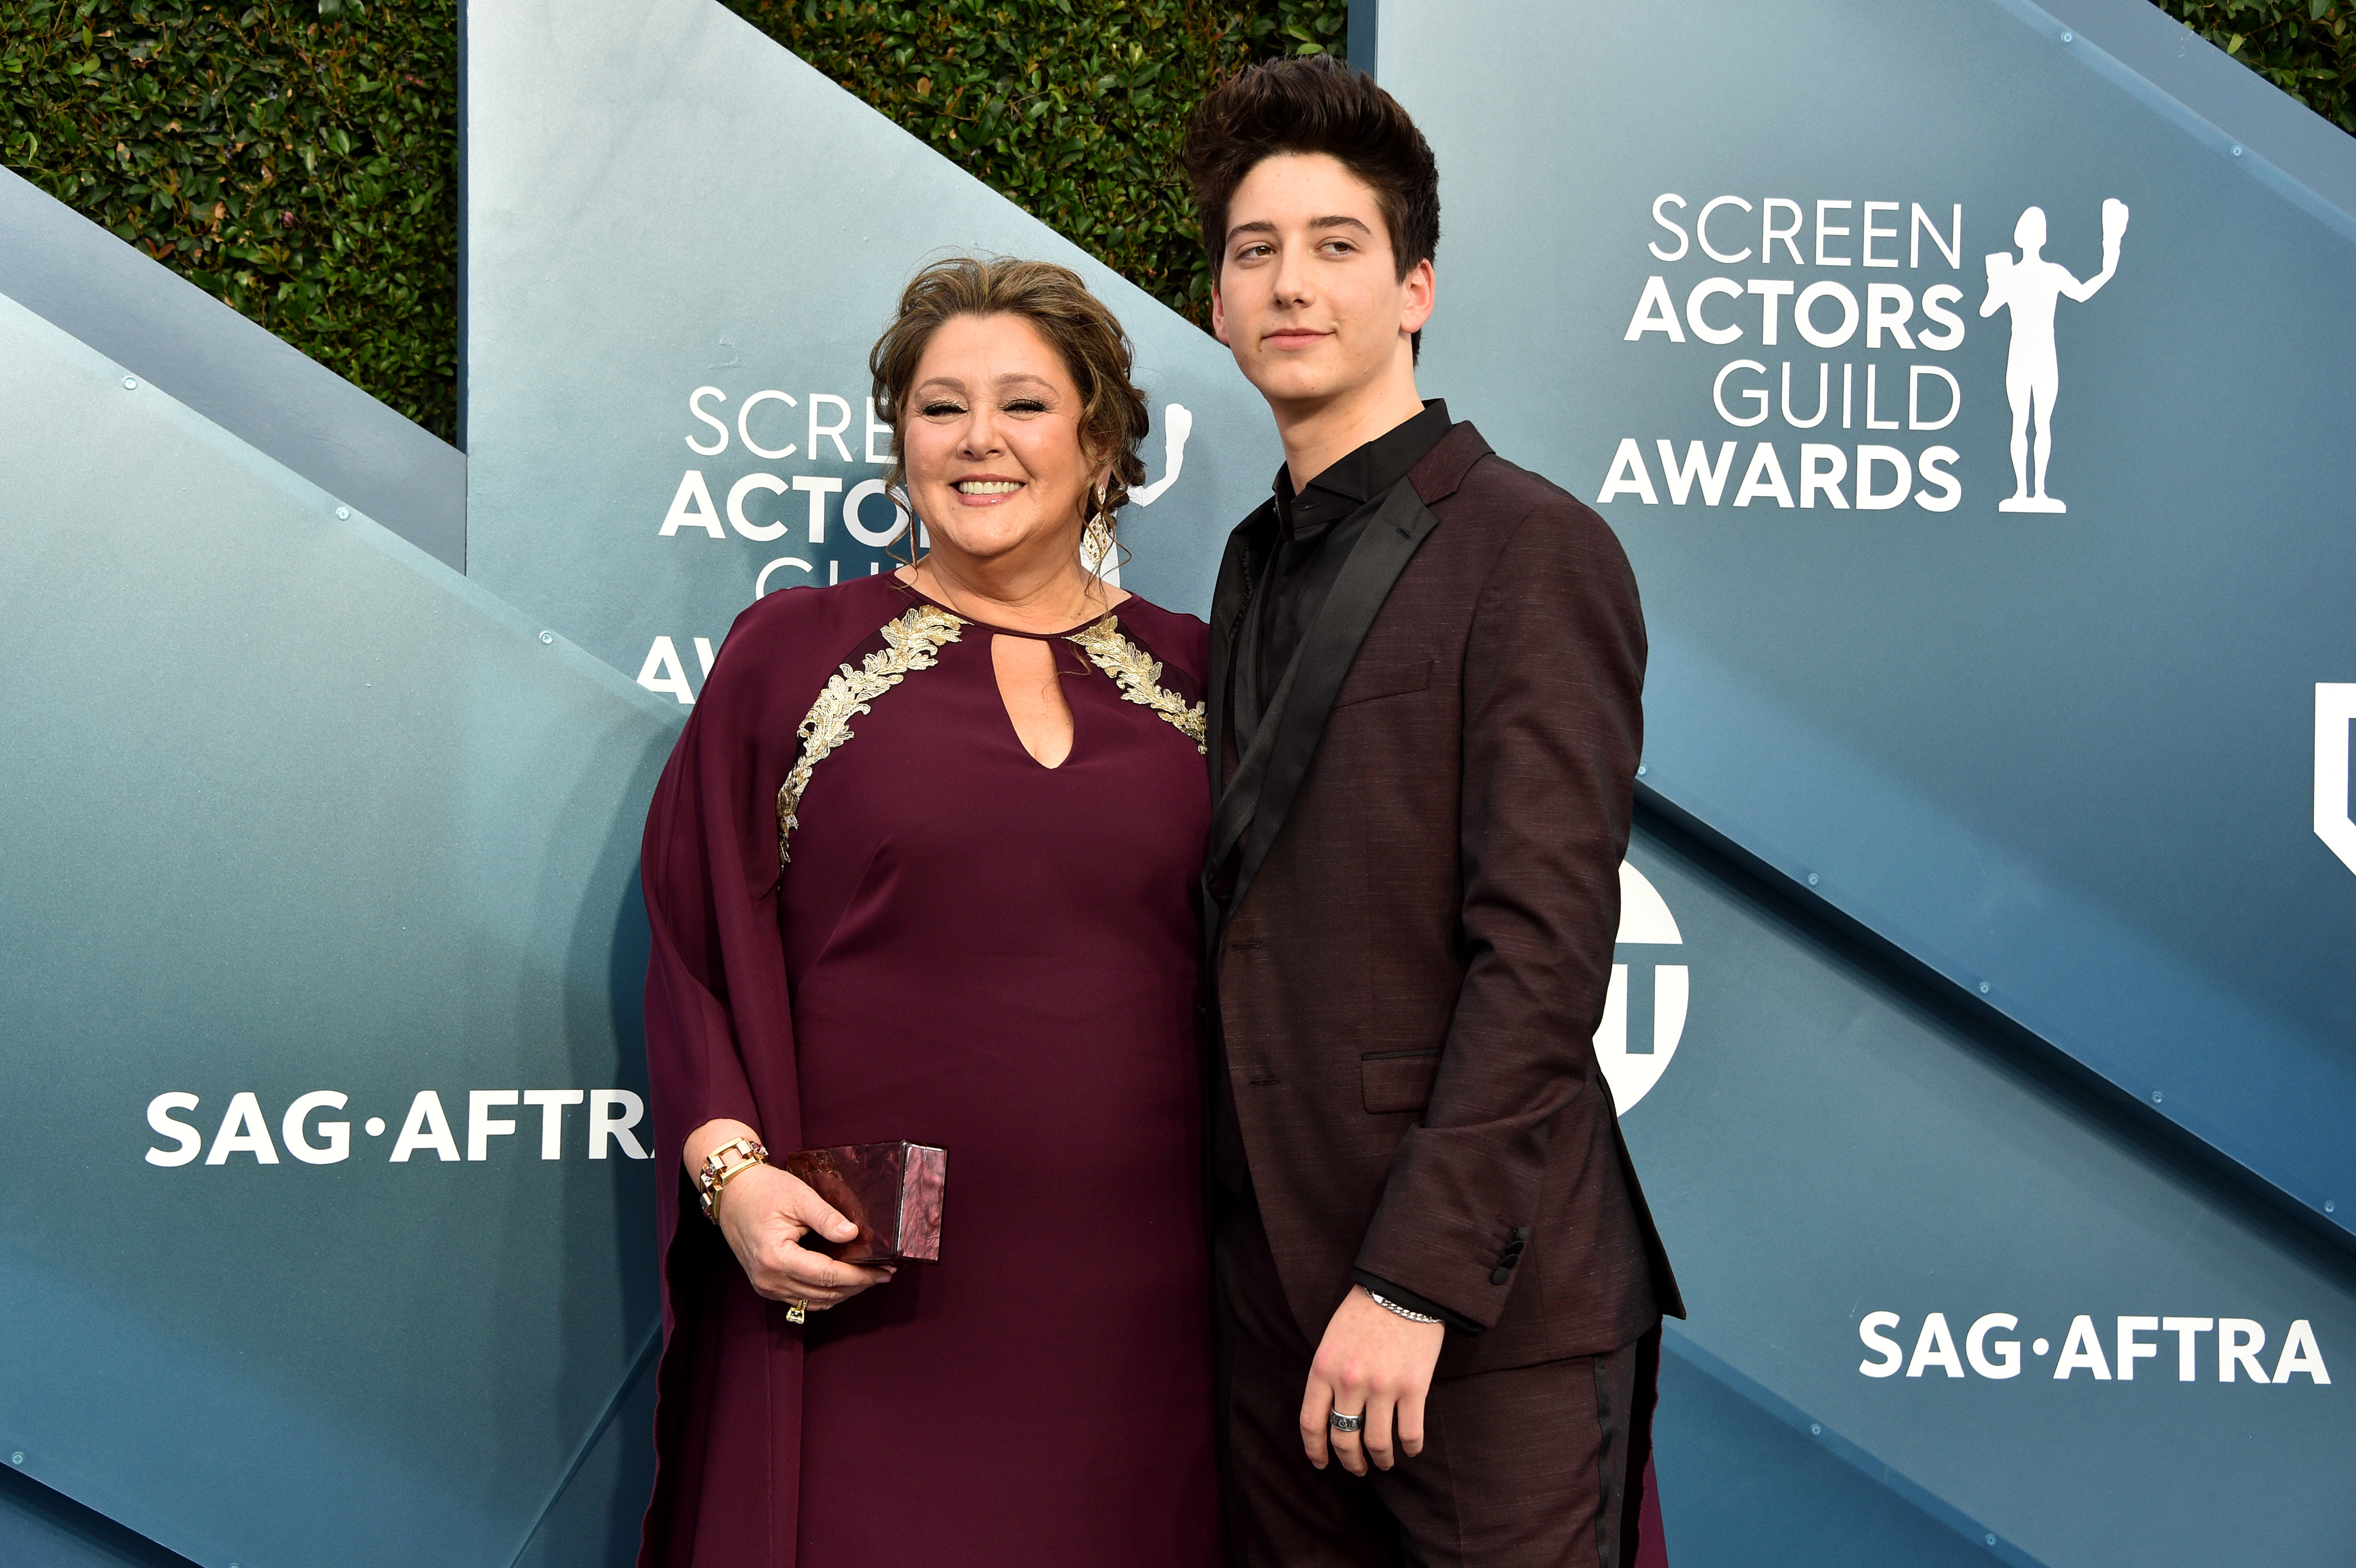 Camryn Manheim and Milo Manheim attend the 26th Annual Screen Actors Guild Awards at The Shrine Auditorium on January 19, 2020, in Los Angeles, California. | Source: Getty Images